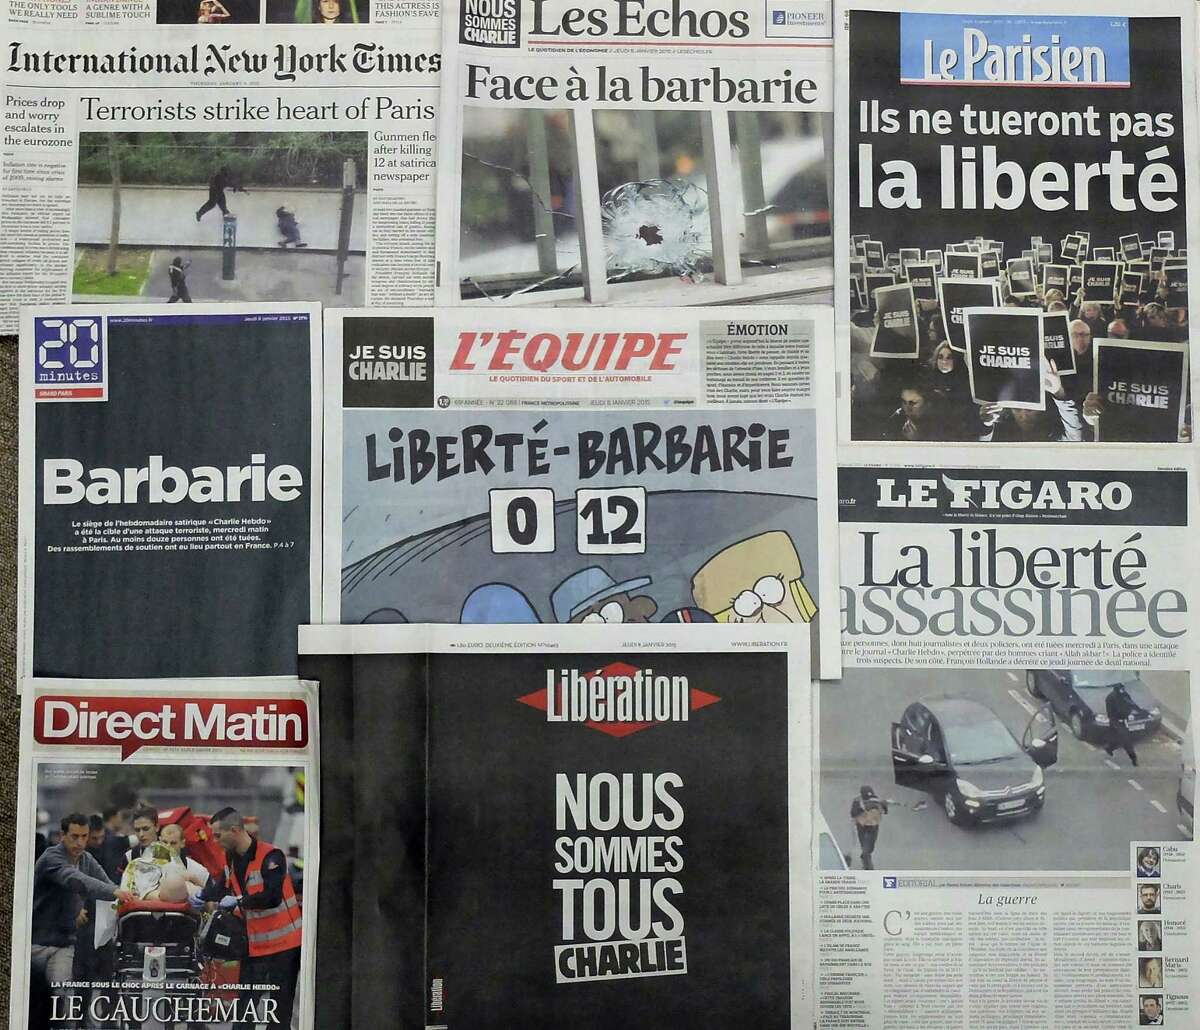 Frontpages of French newspapers reporting about Wednesday's attack on a satirical newspaper in Paris are displayed in Paris Thursday, Jan. 8, 2015. Police hunted Thursday for two heavily armed men, one with possible links to al-Qaida, in the methodical killing of 12 people at the Charlie Hebdo that caricatured the Prophet Muhammed. The prime minister said the possibility of a new attack "is our main concern" and announced several overnight arrests. (AP Photo/Bertrand Combaldieu)